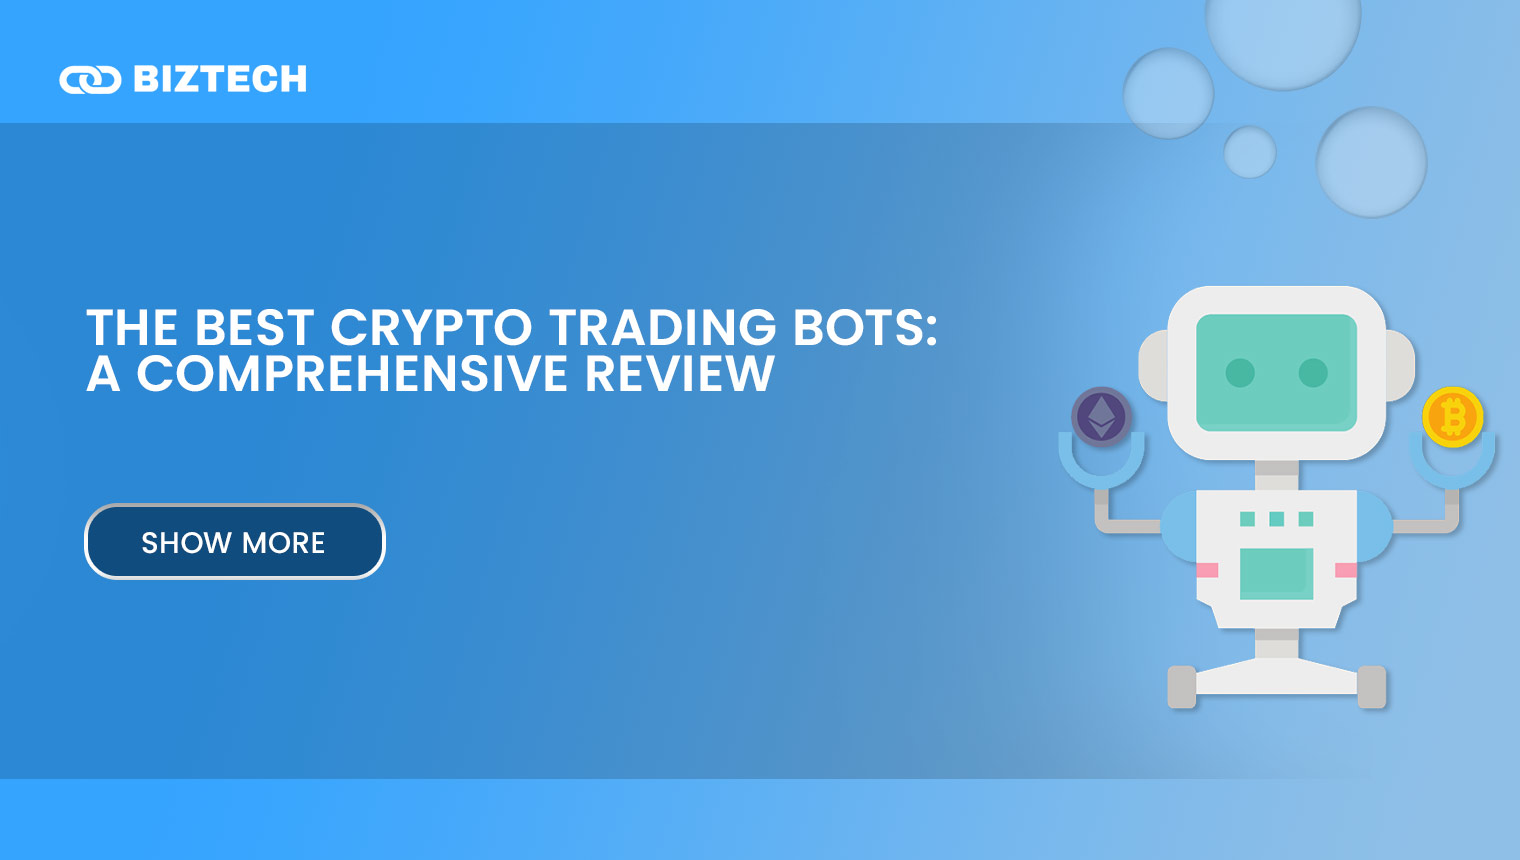 The Best Crypto Trading Bots: A Comprehensive Review